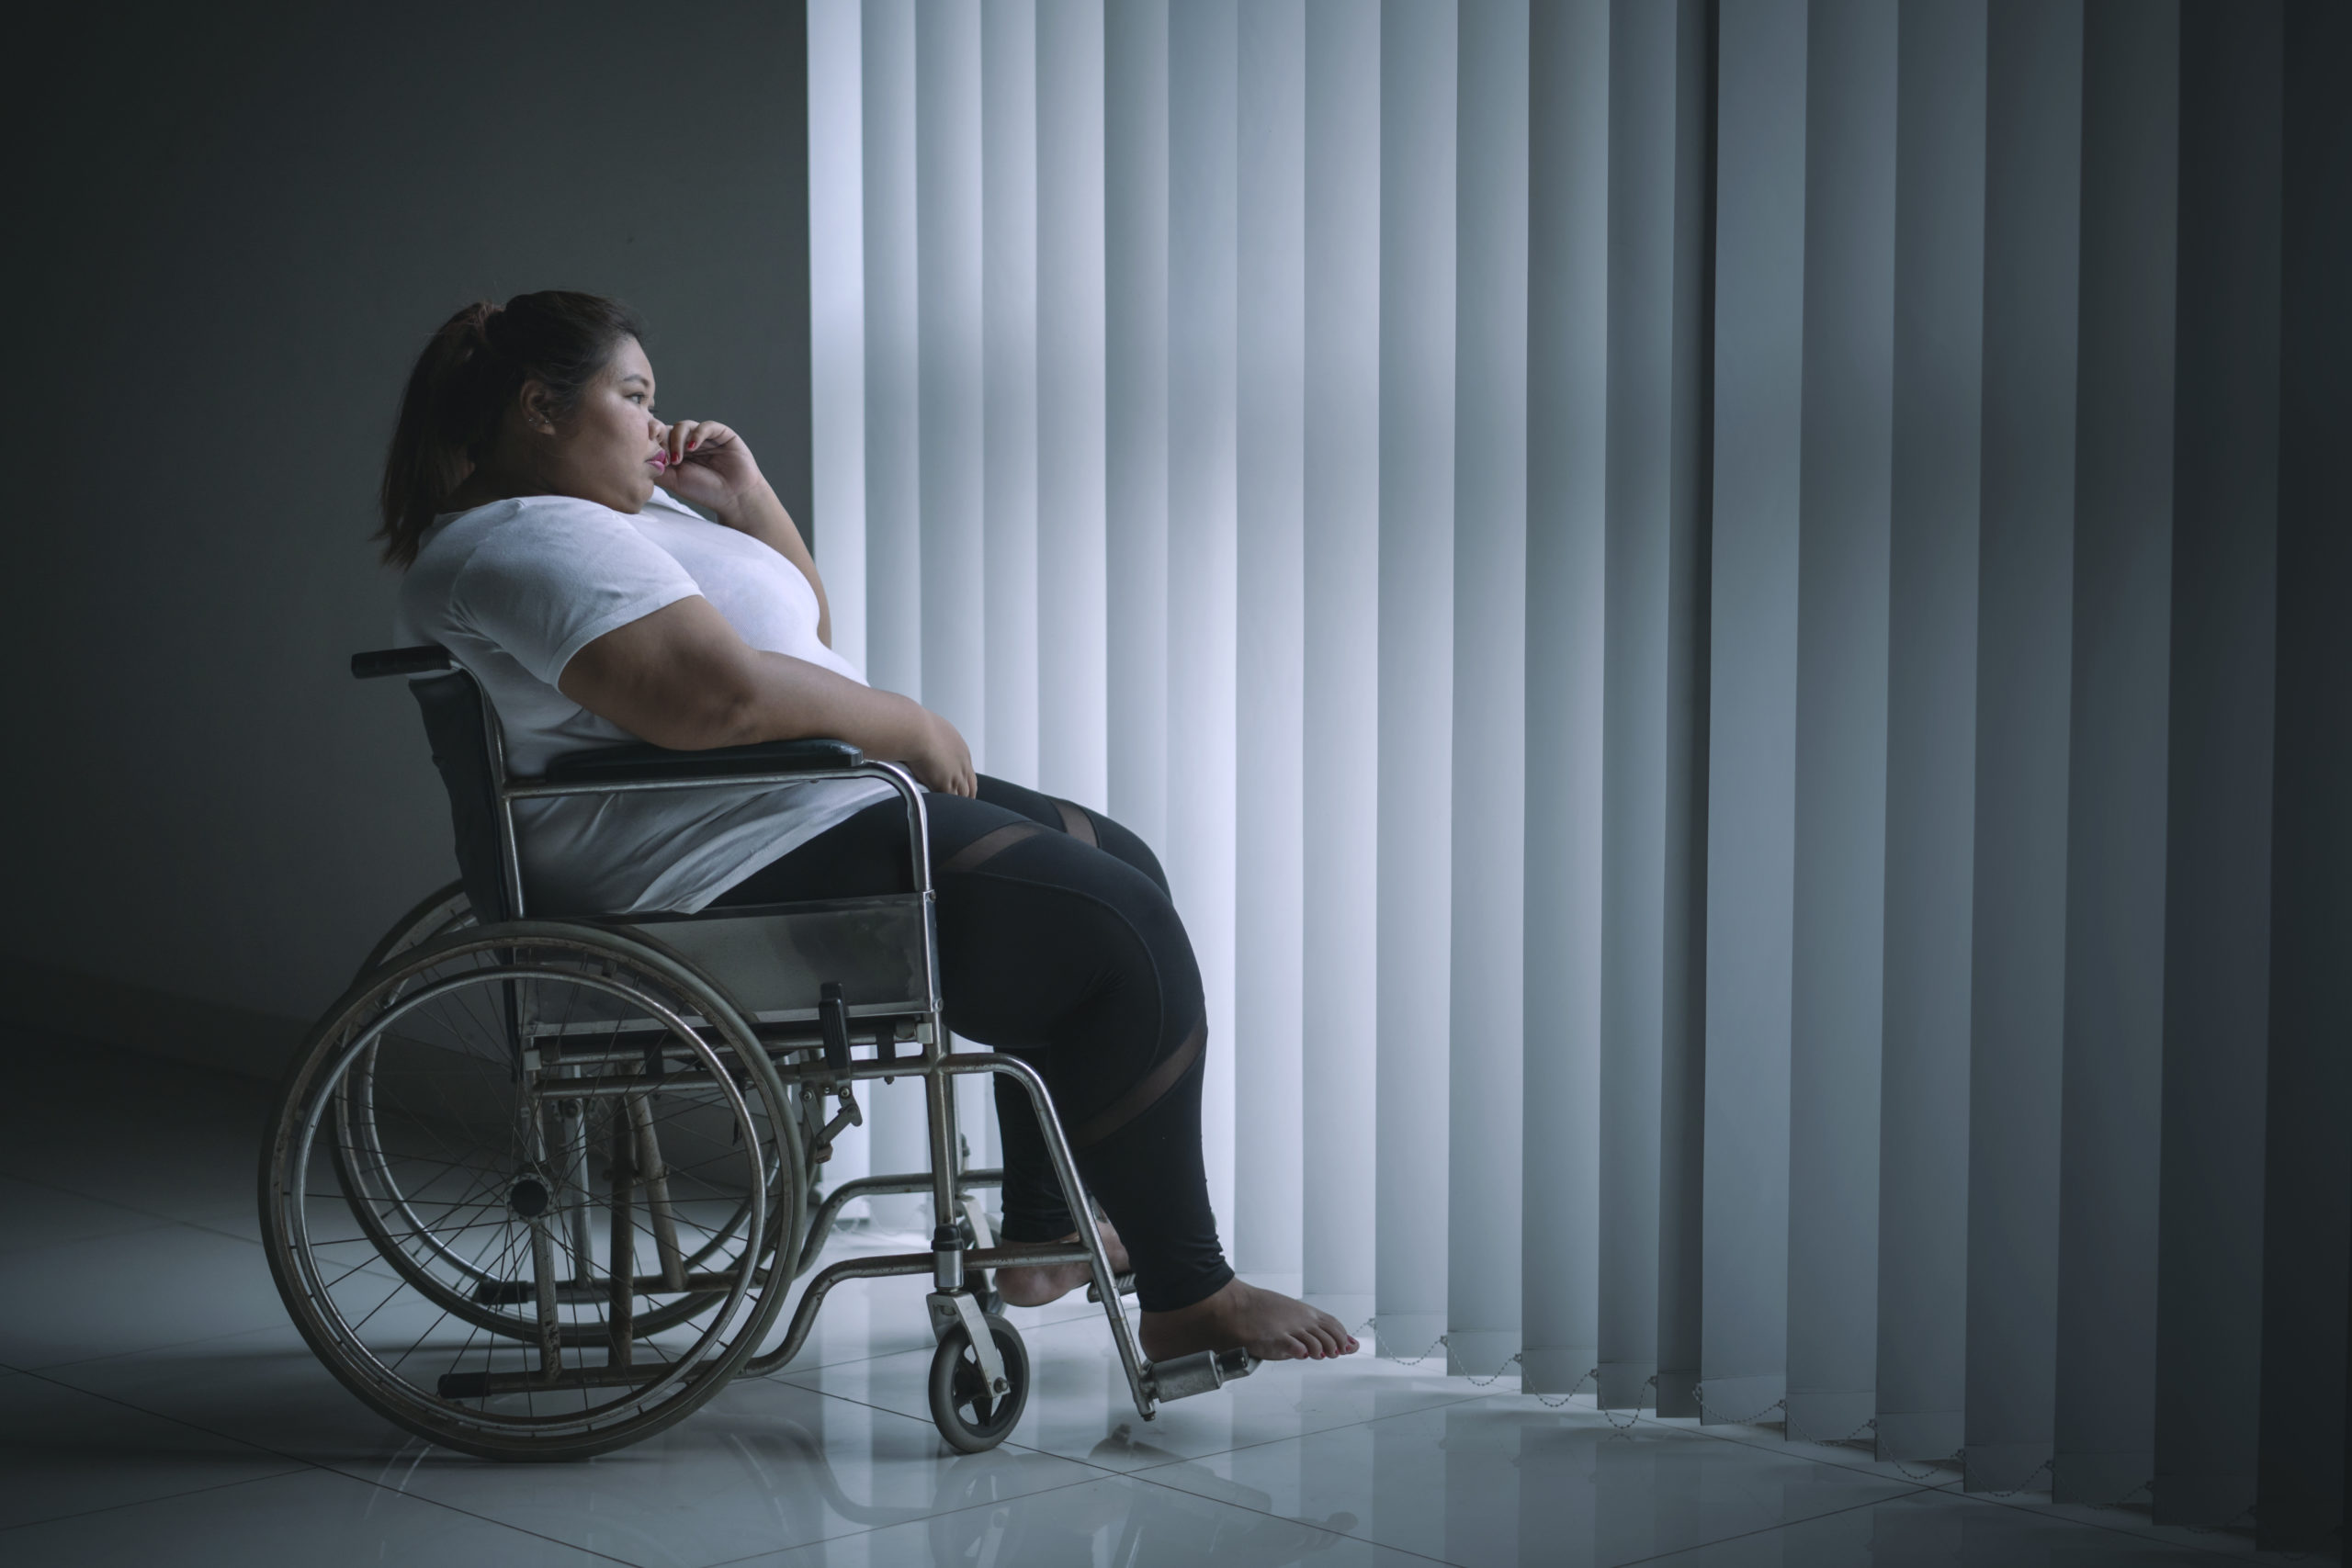 Disabled woman looks pensive near the window